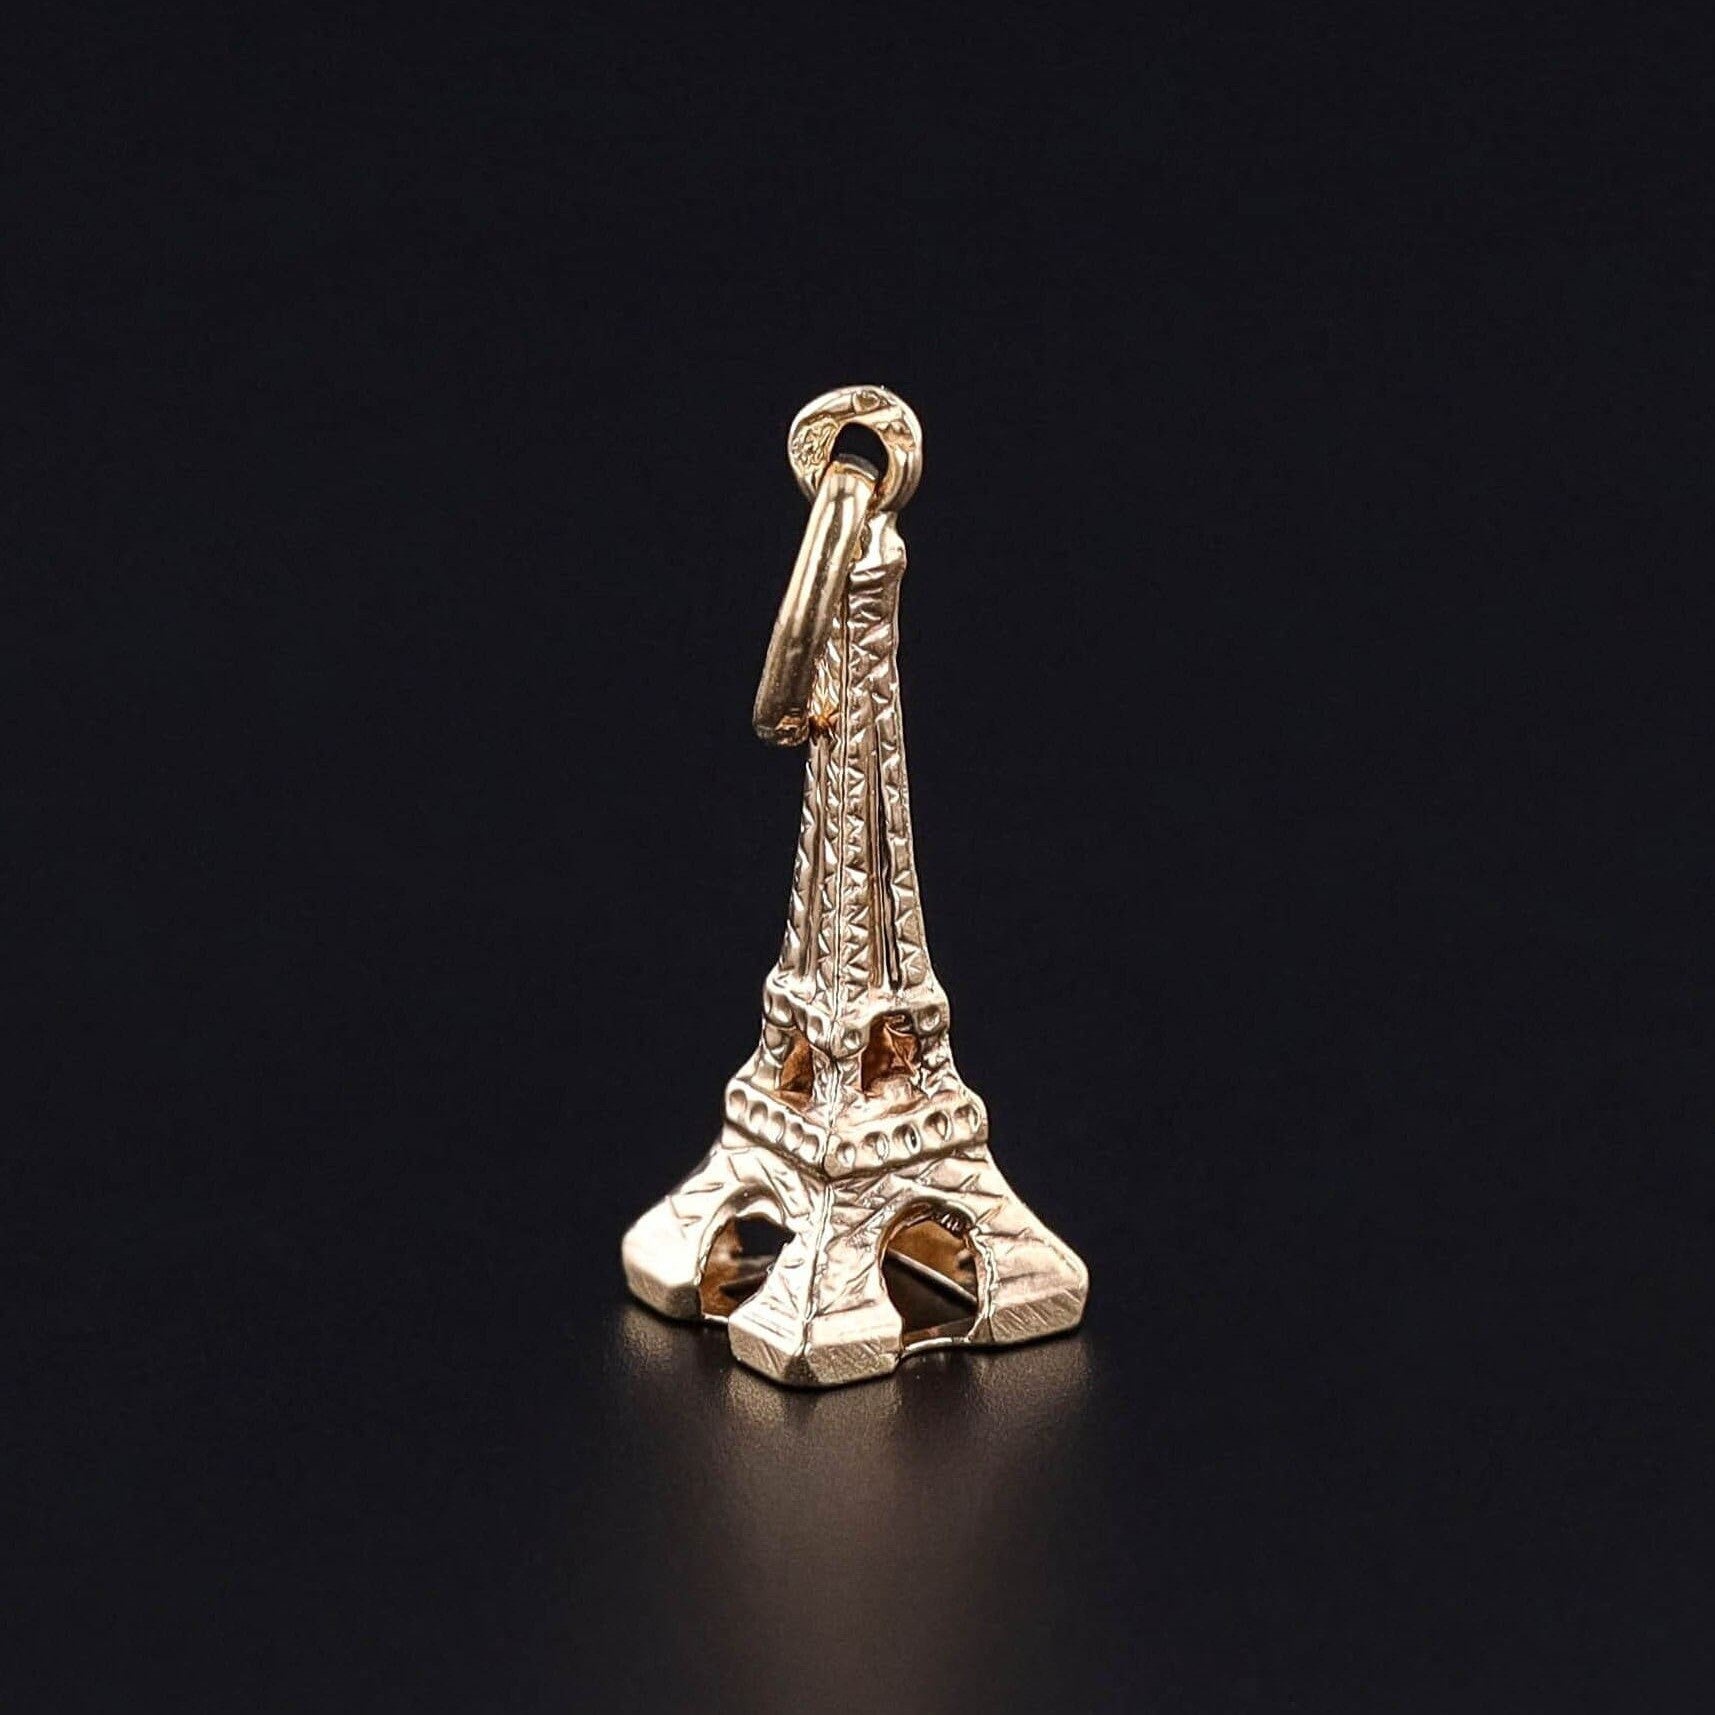 Vintage Eiffel Tower Charm of 18k Gold